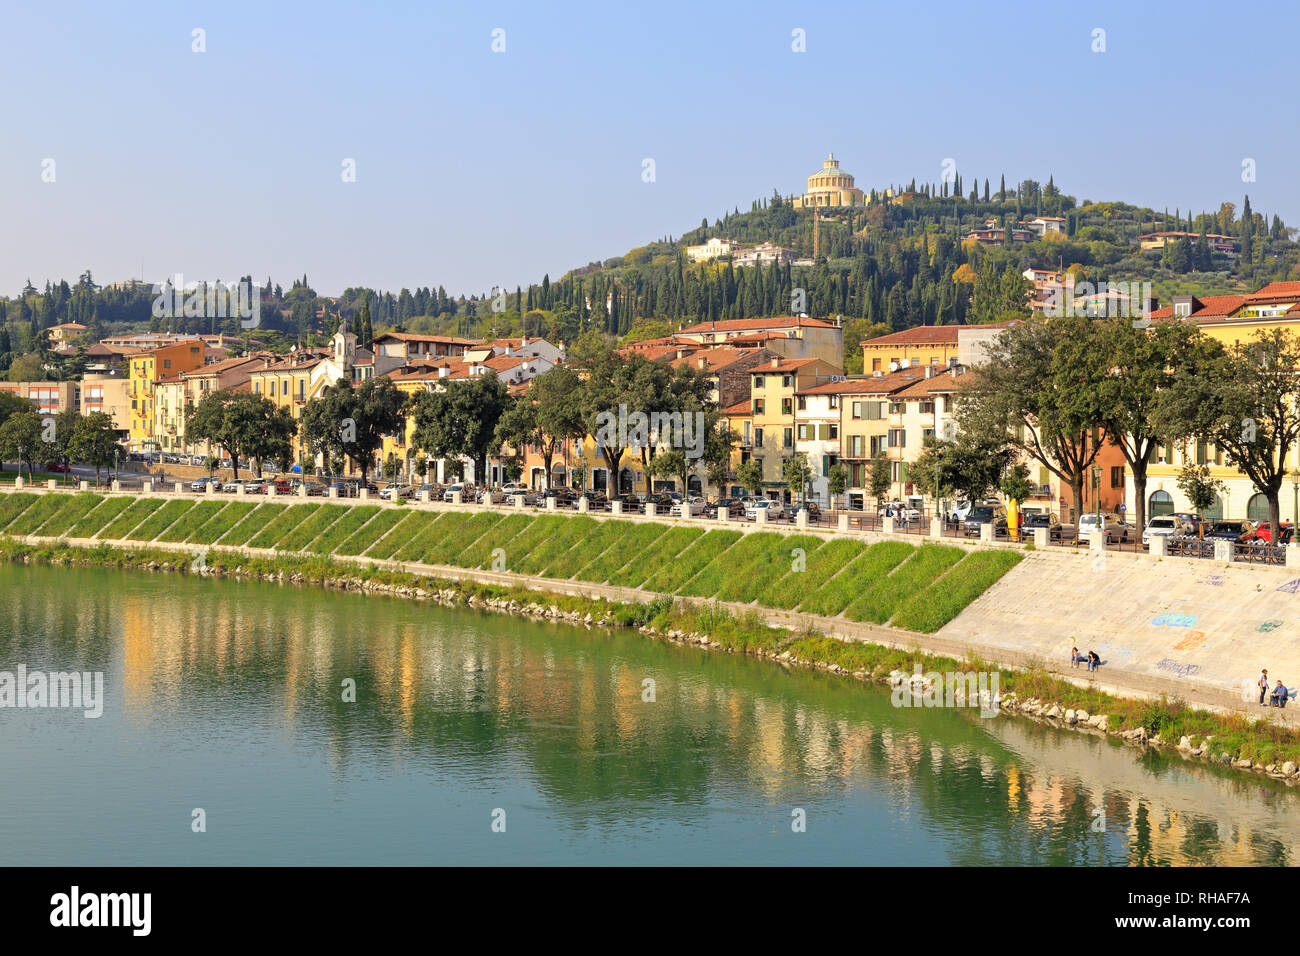 Adige River and distant hilltop Sanctuary our Lady of Lourdes from the Ponte Pietra, Verona, Veneto, Italy. Stock Photo